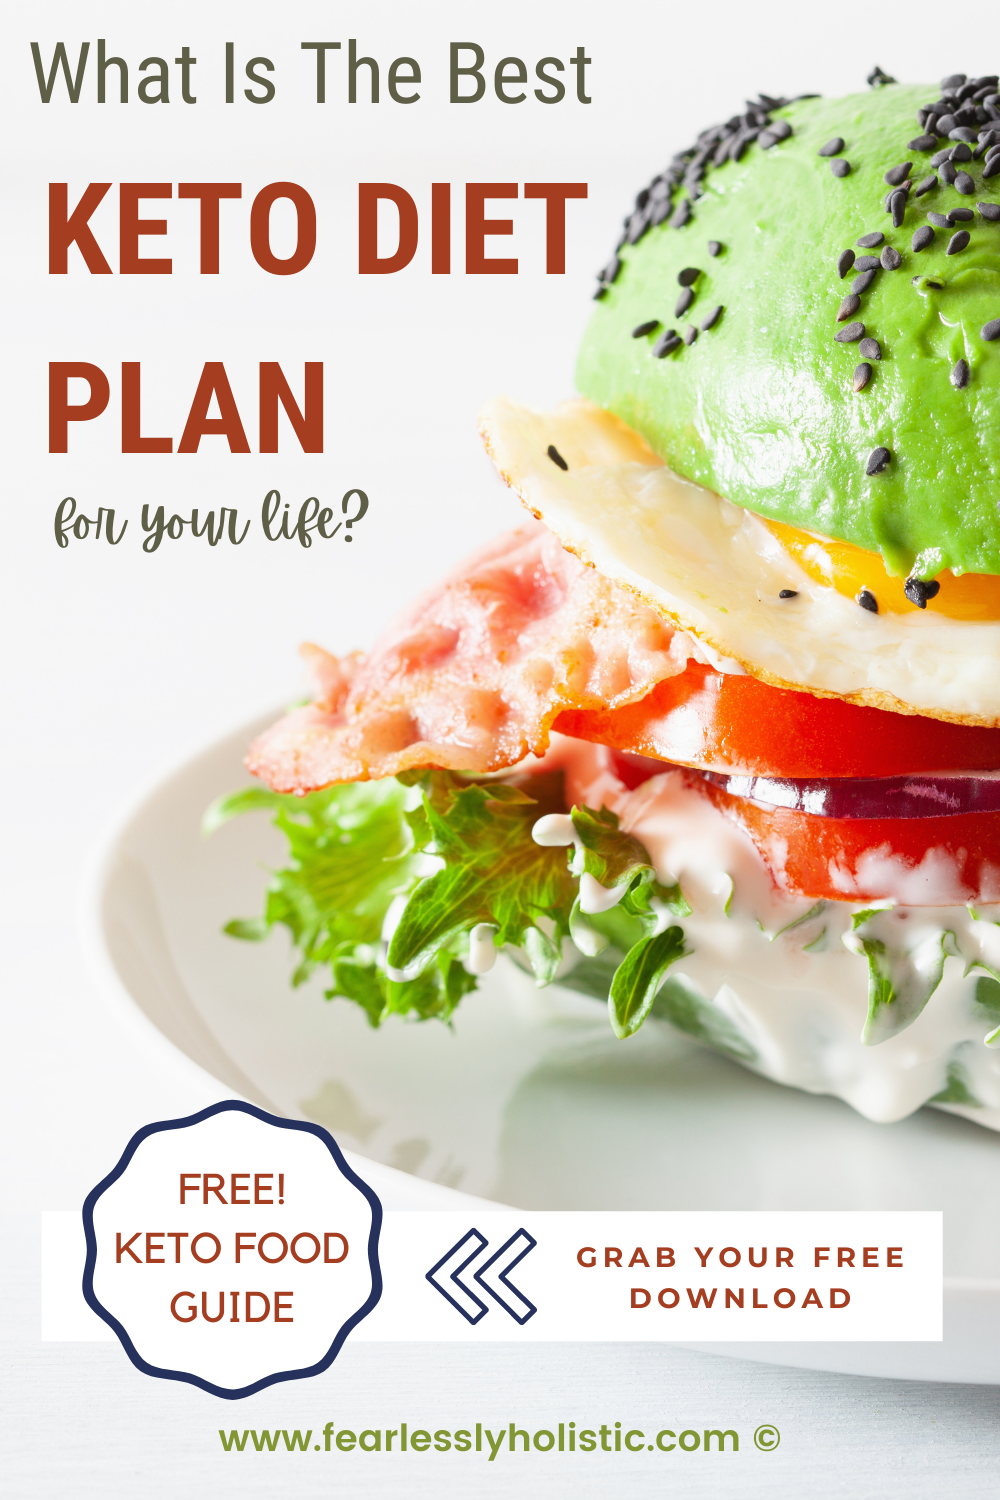 What Is The Best Keto Diet Plan?